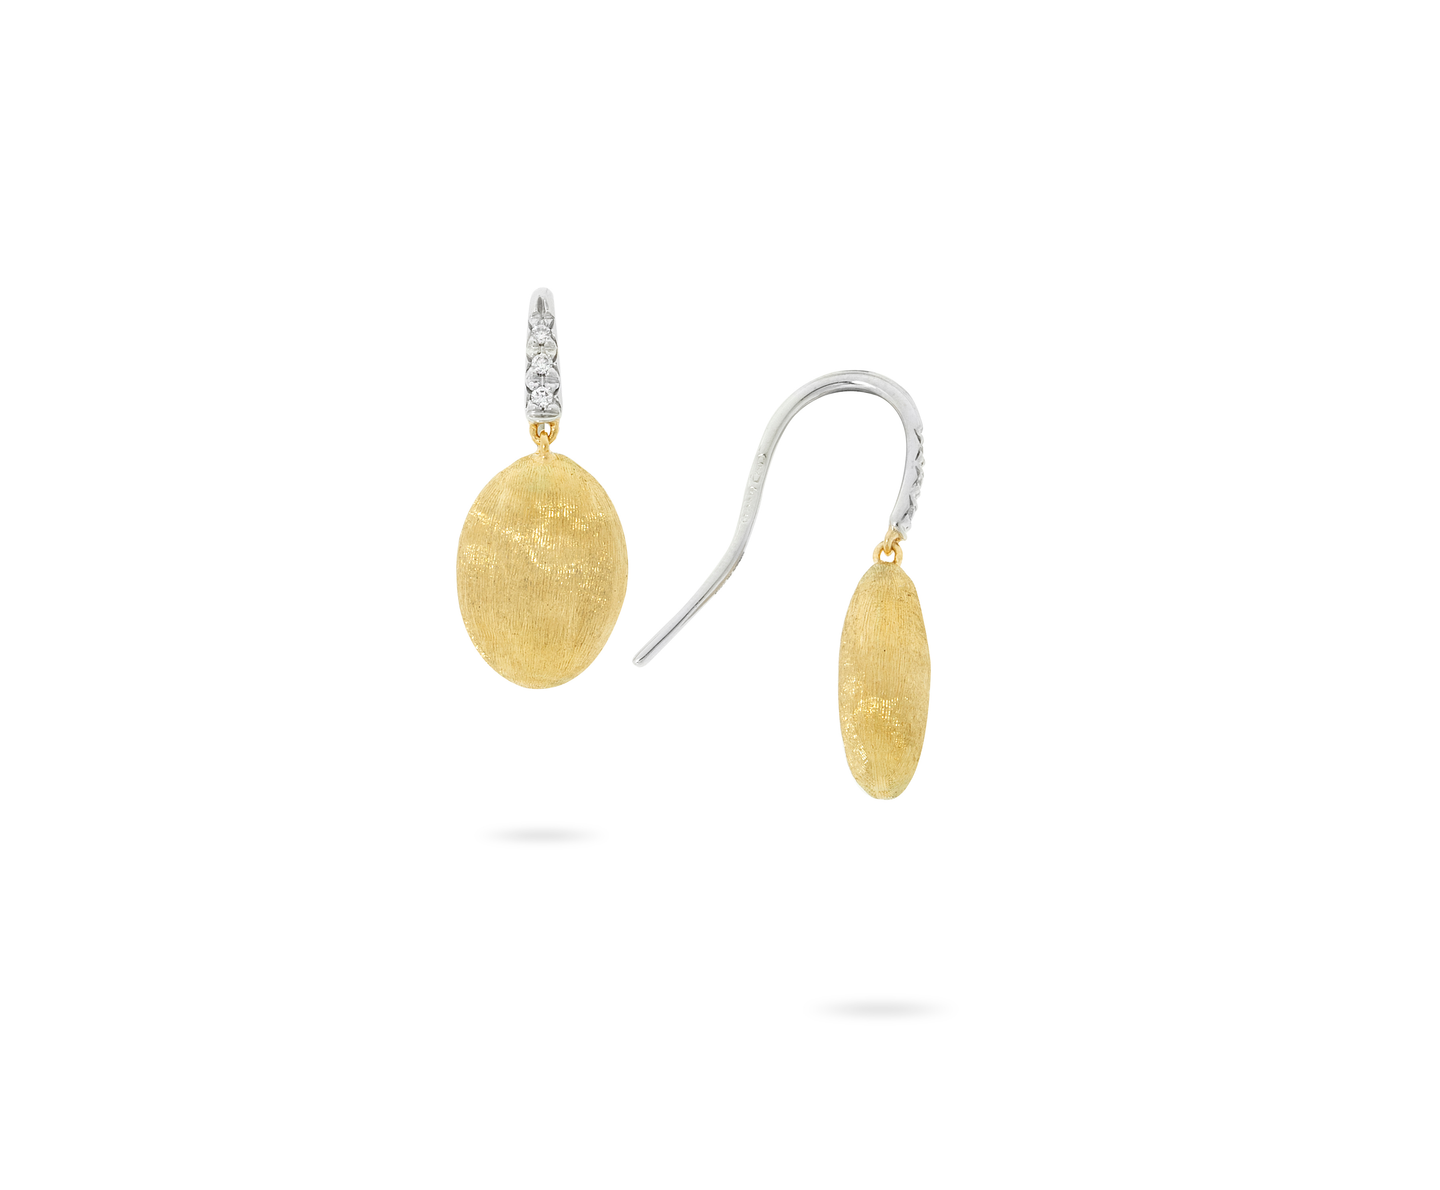 Marco Bicego Siviglia 18K Yellow and White Gold Dangle Earrings with Diamond Accent